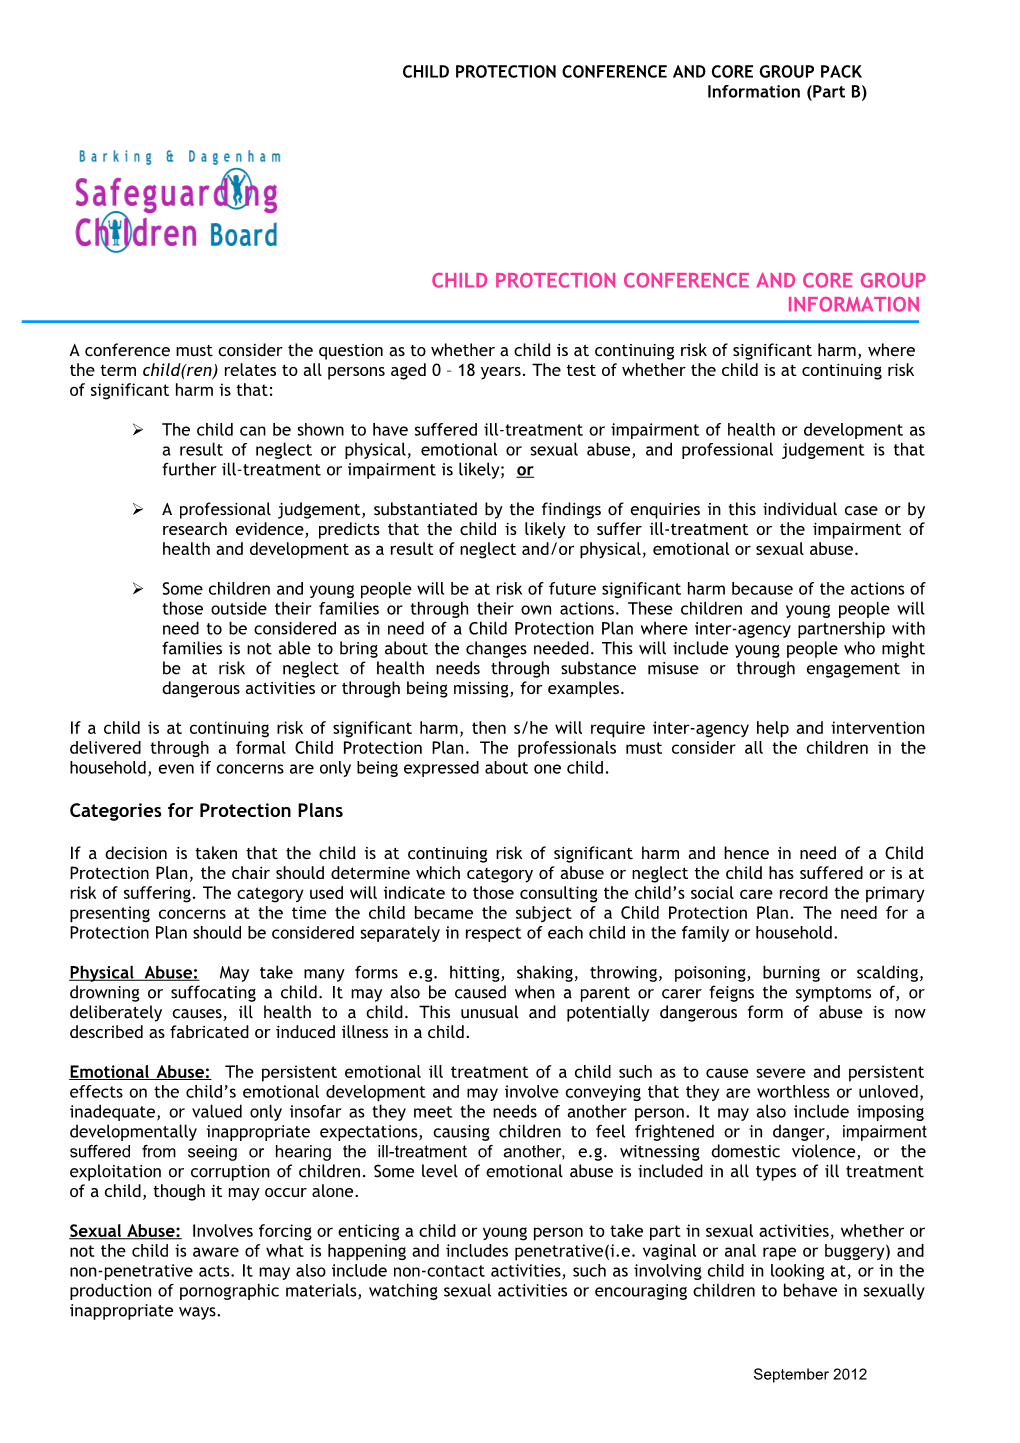 Child Protection Conference Information